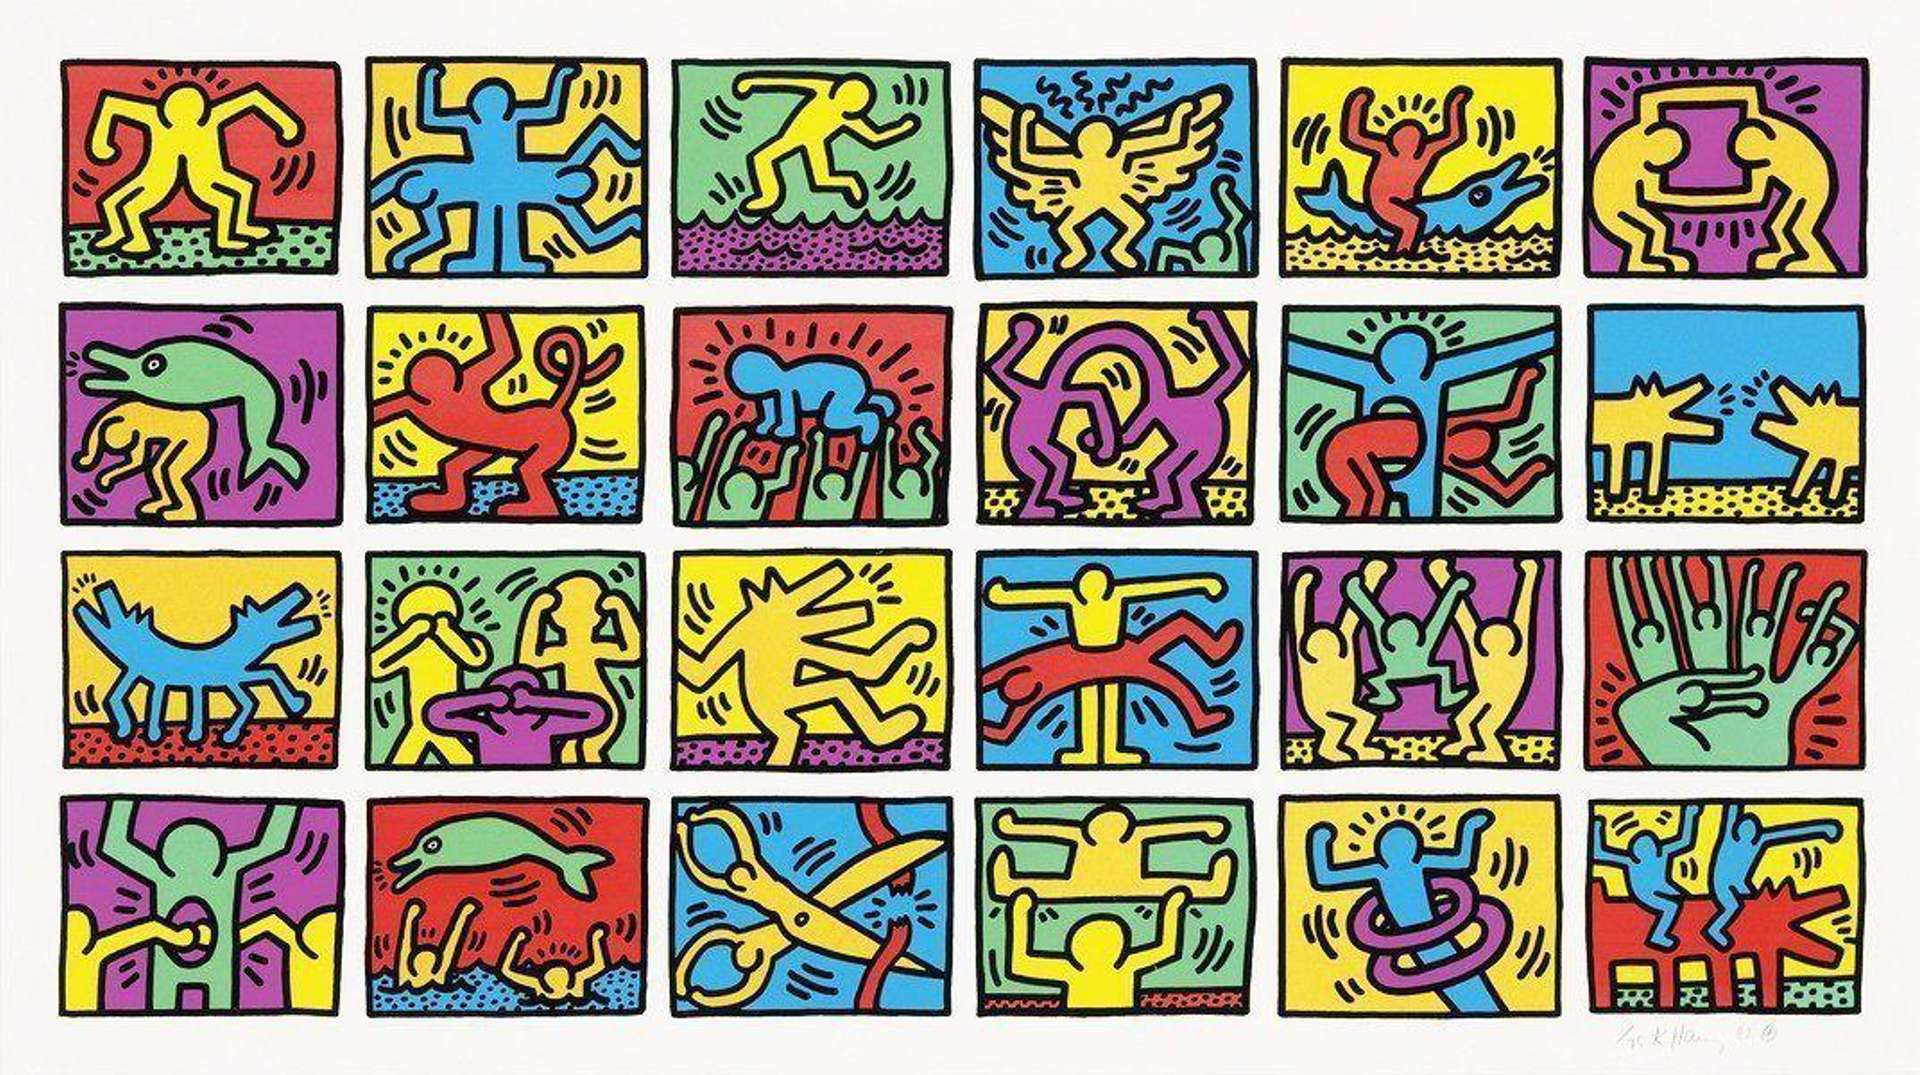 Retrospect, 1989 by Keith Haring